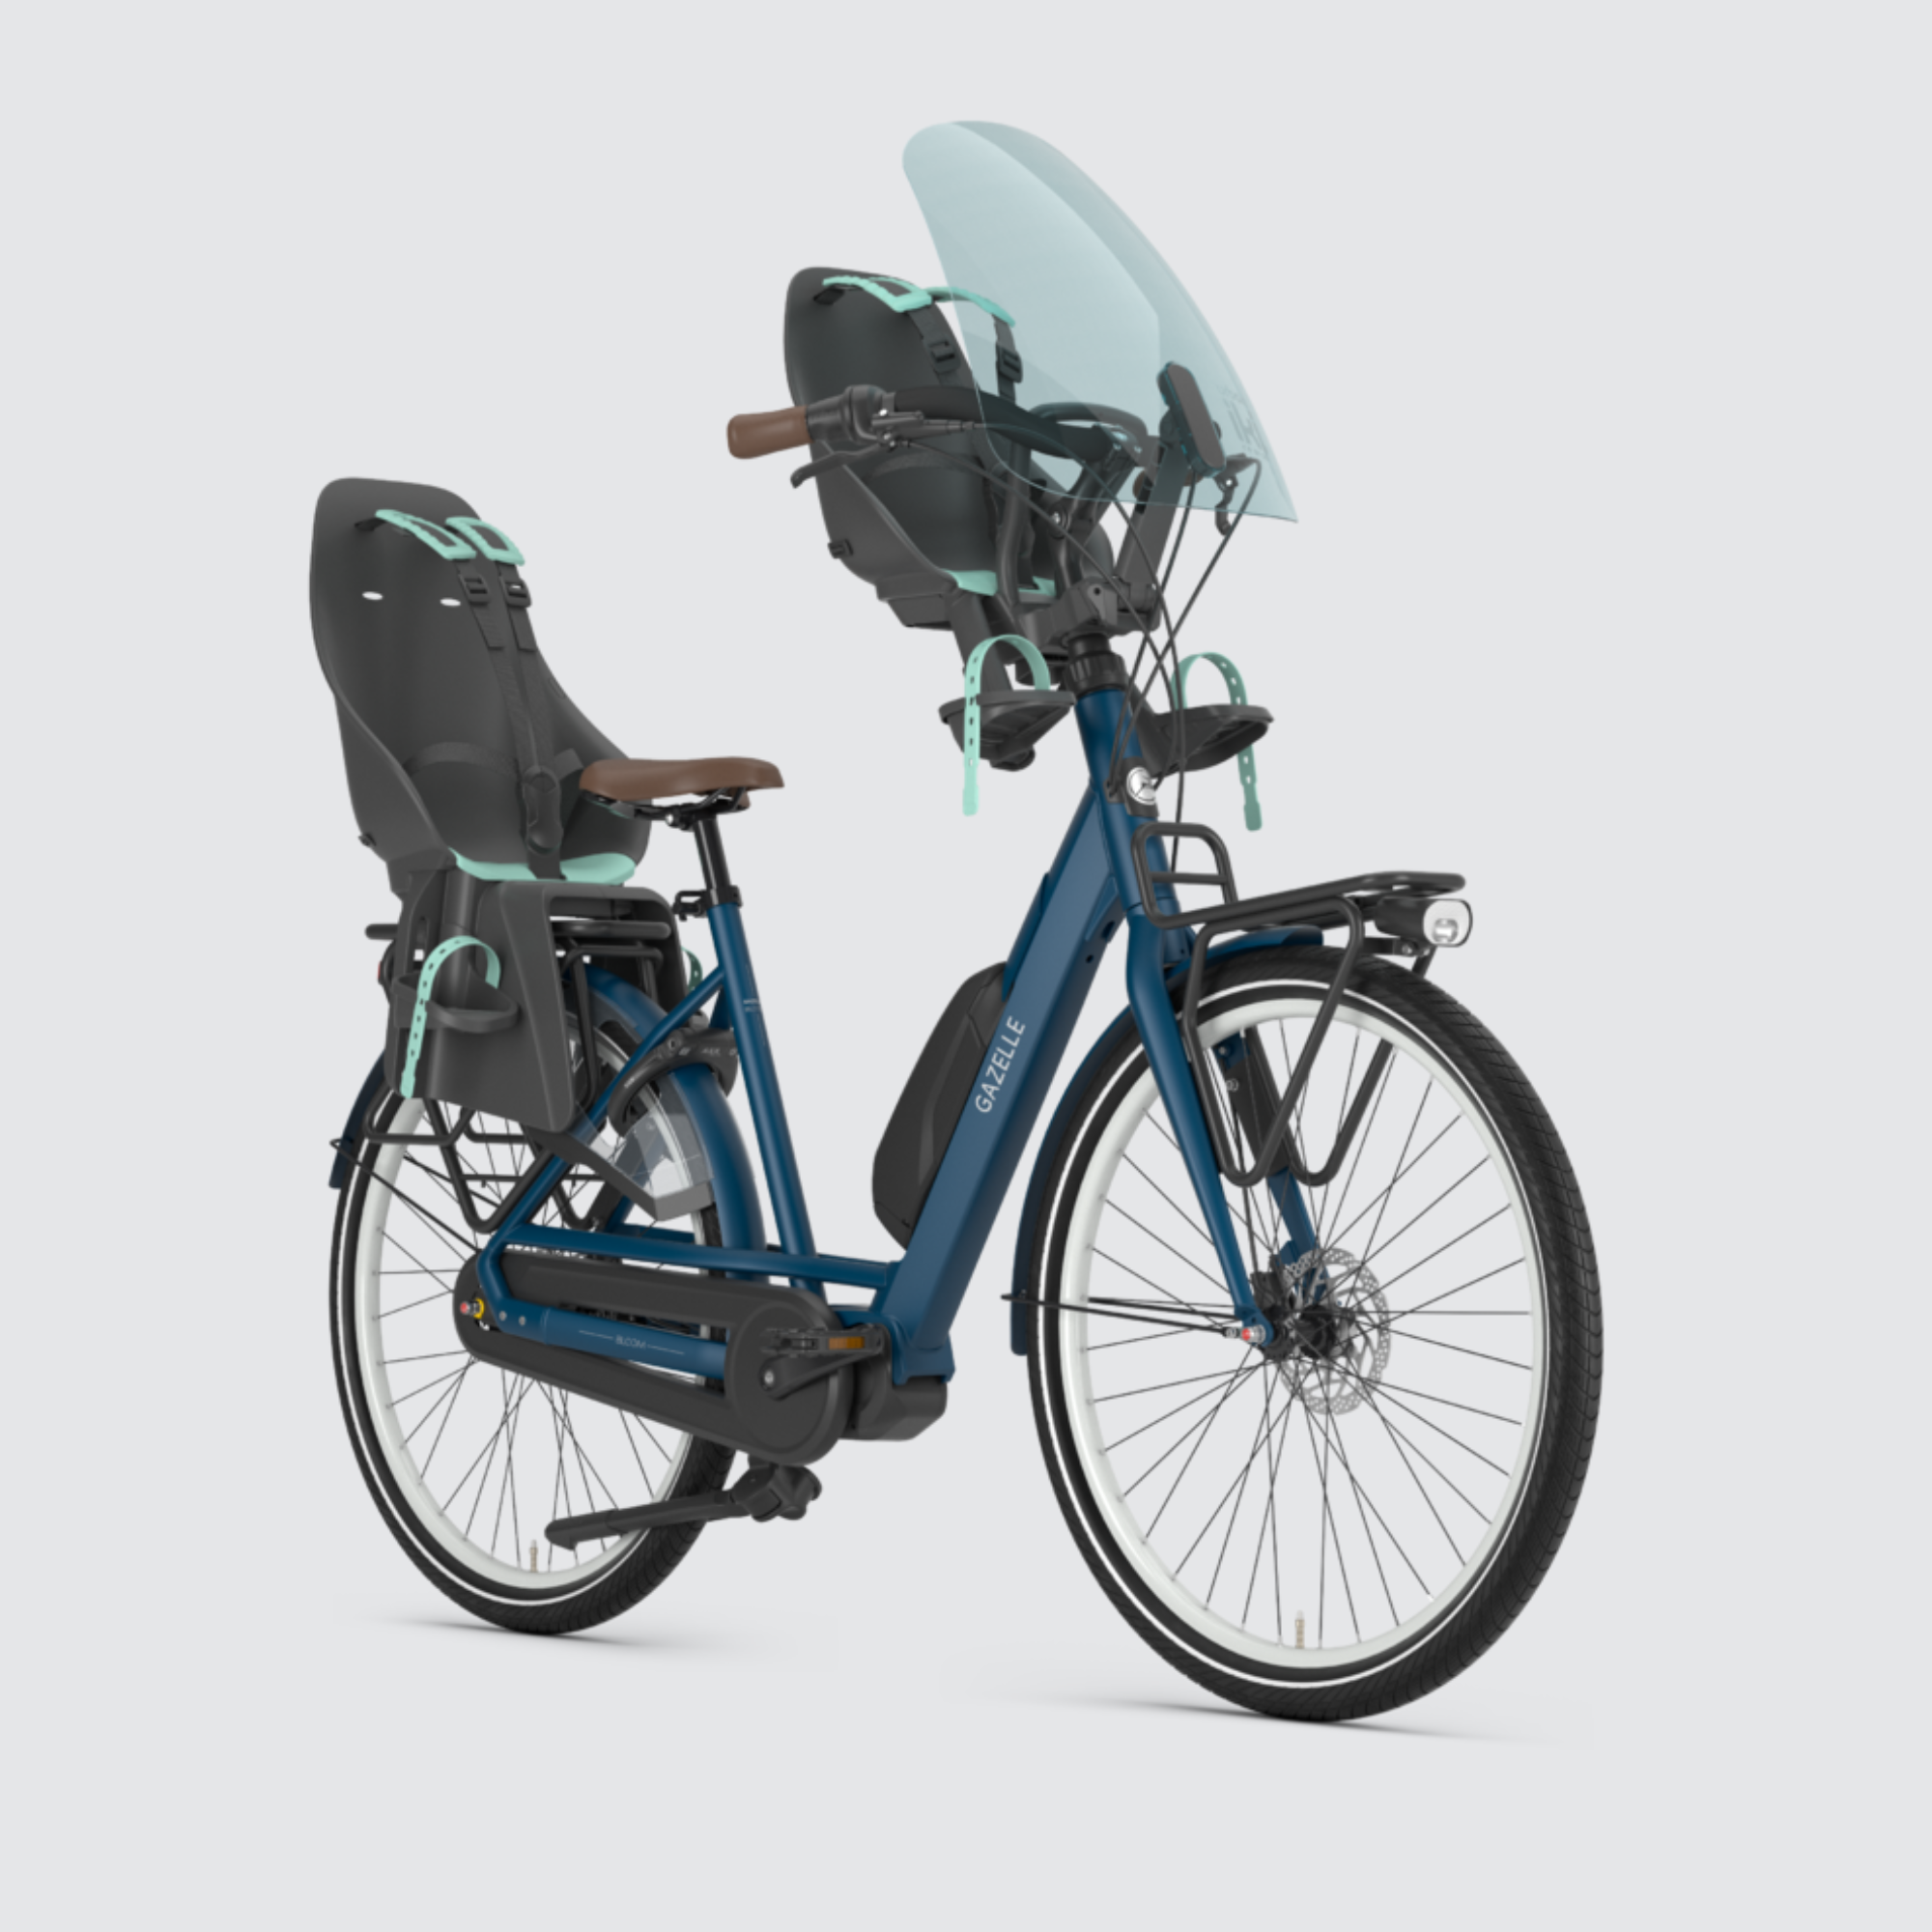 Explore the spacious design and stability of the Gazelle Bloom C7 HMS in mallard blue – your ideal family-friendly electric bike. Bicycle shown with child seats in front and rear position with screen at the front. Child sseats and screen not included and must be purchased separately.